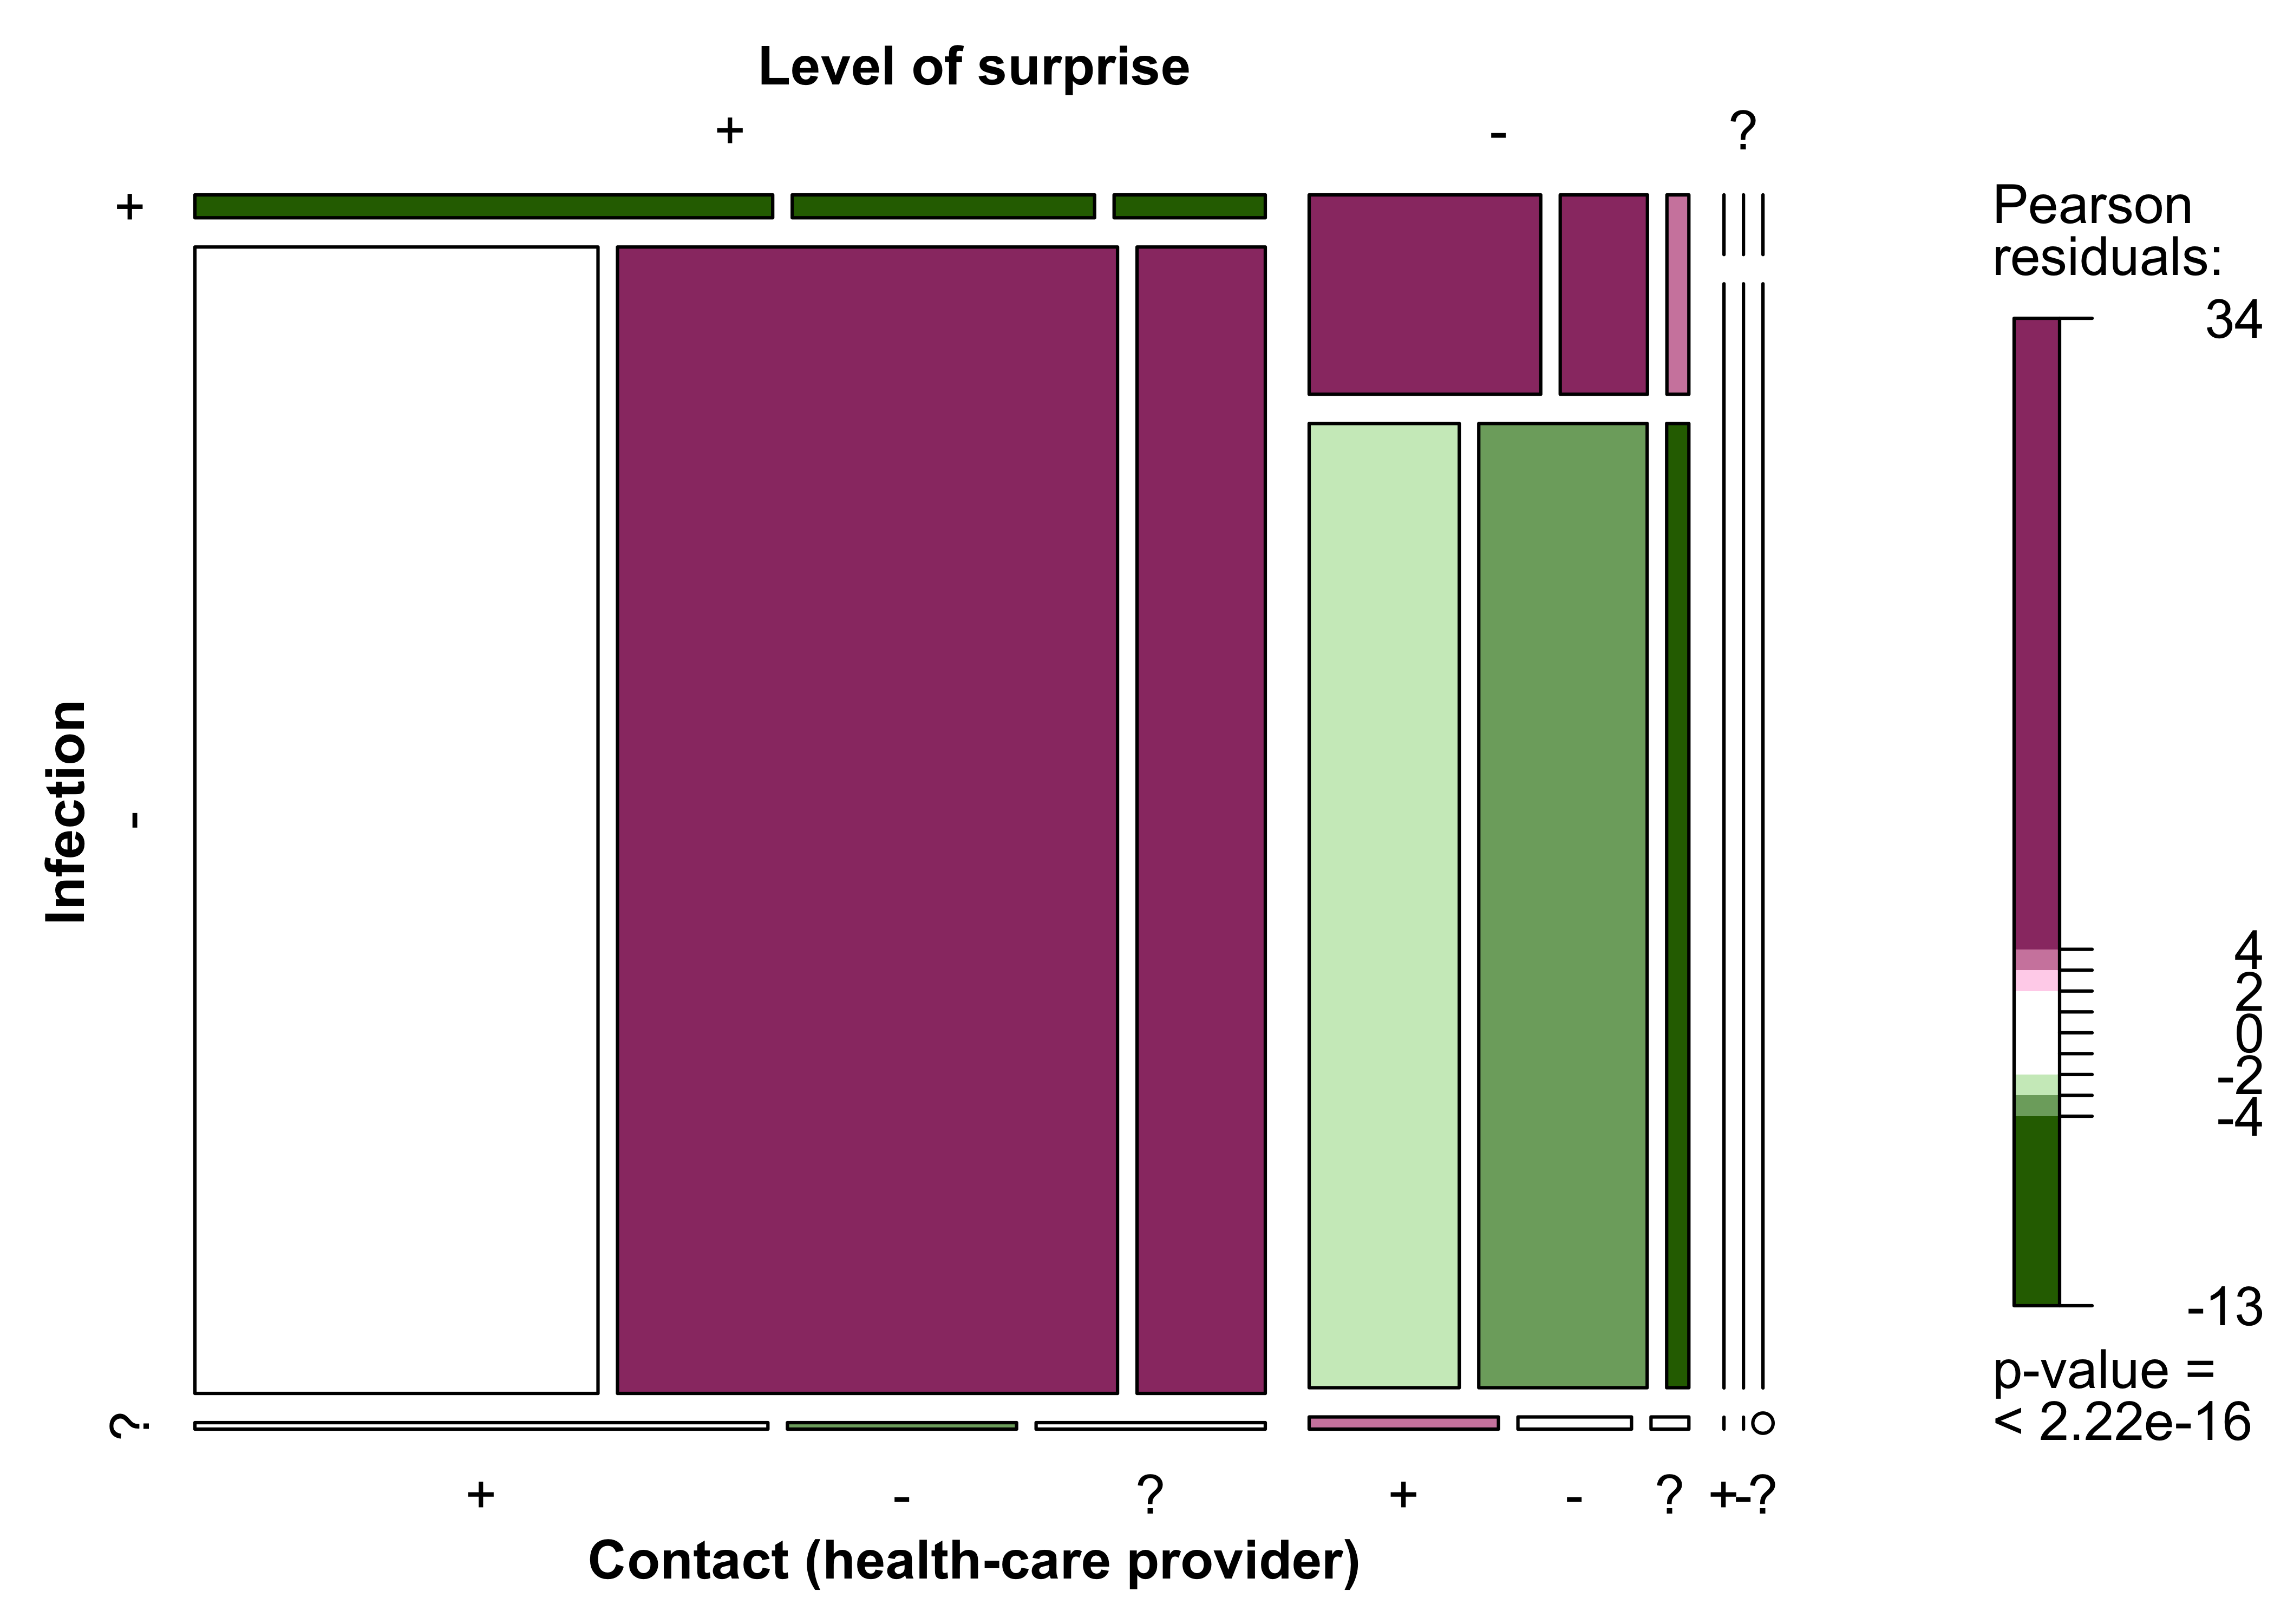 Fig. 7: EDUS – Relationship between level of surprise, intention to contact a health-care provider and infection.